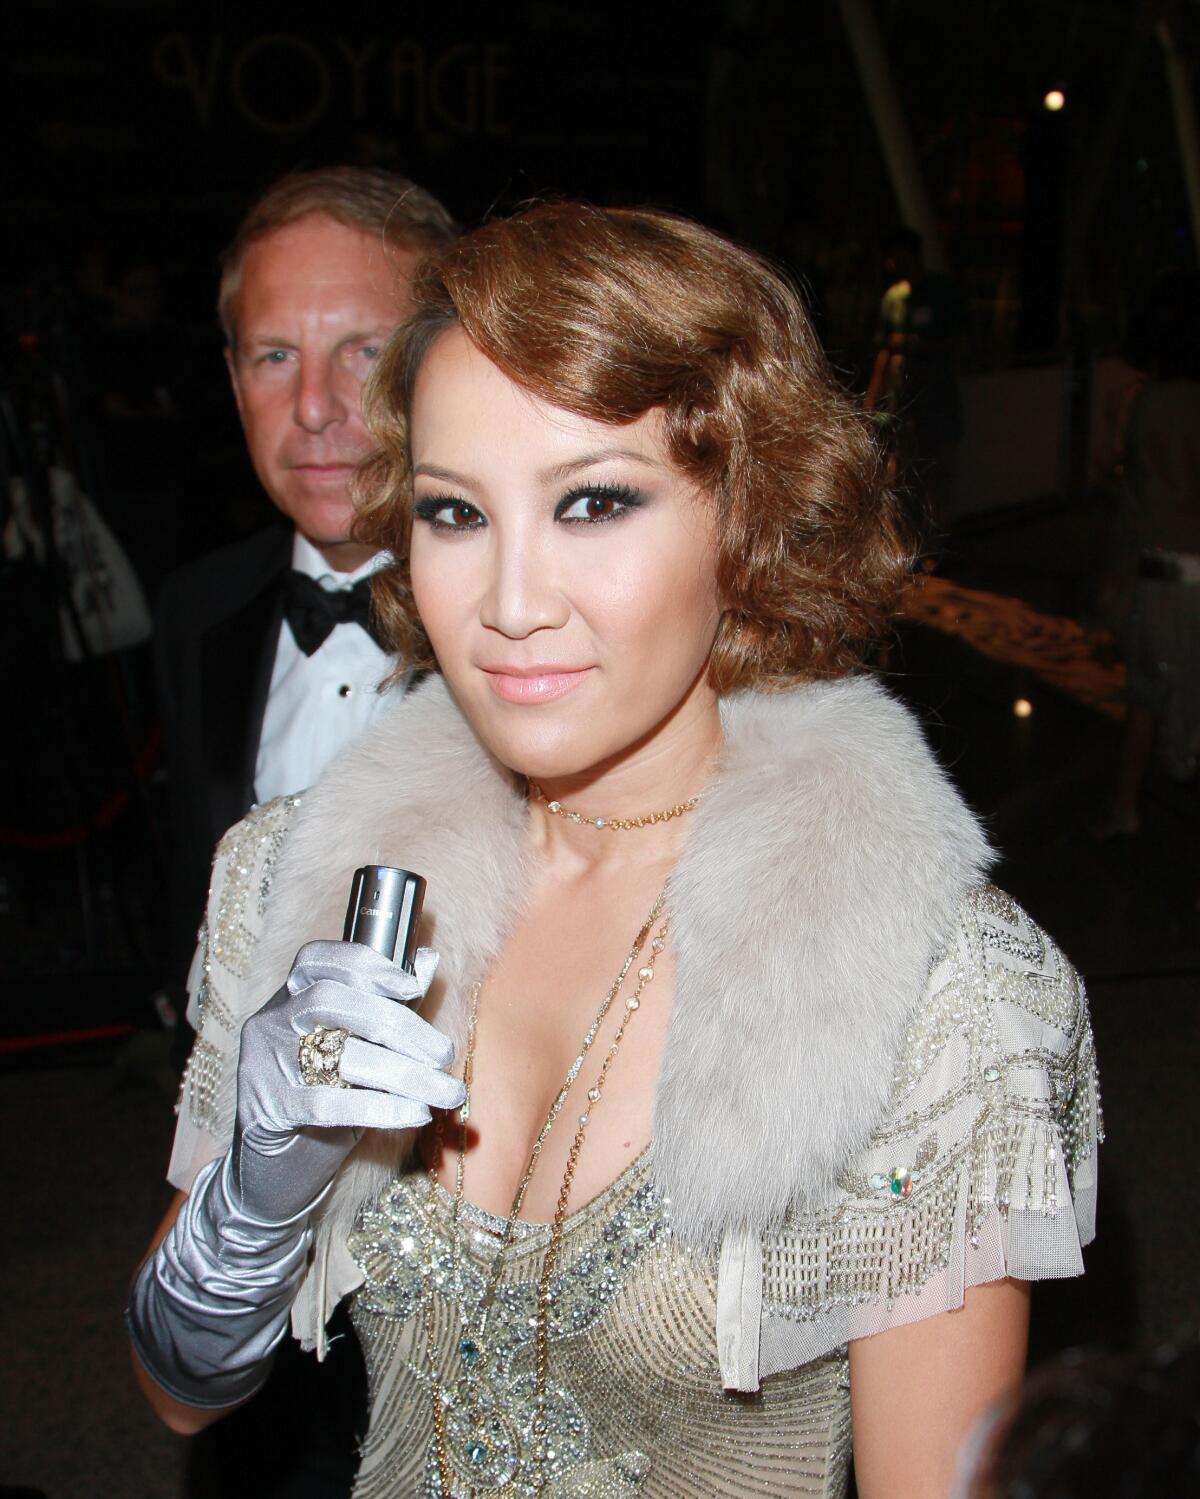 Coco Lee Man wears a silver and gold beaded dress with silver satin gloves. Husband Bruce Rockowitz wears a tuxedo. 